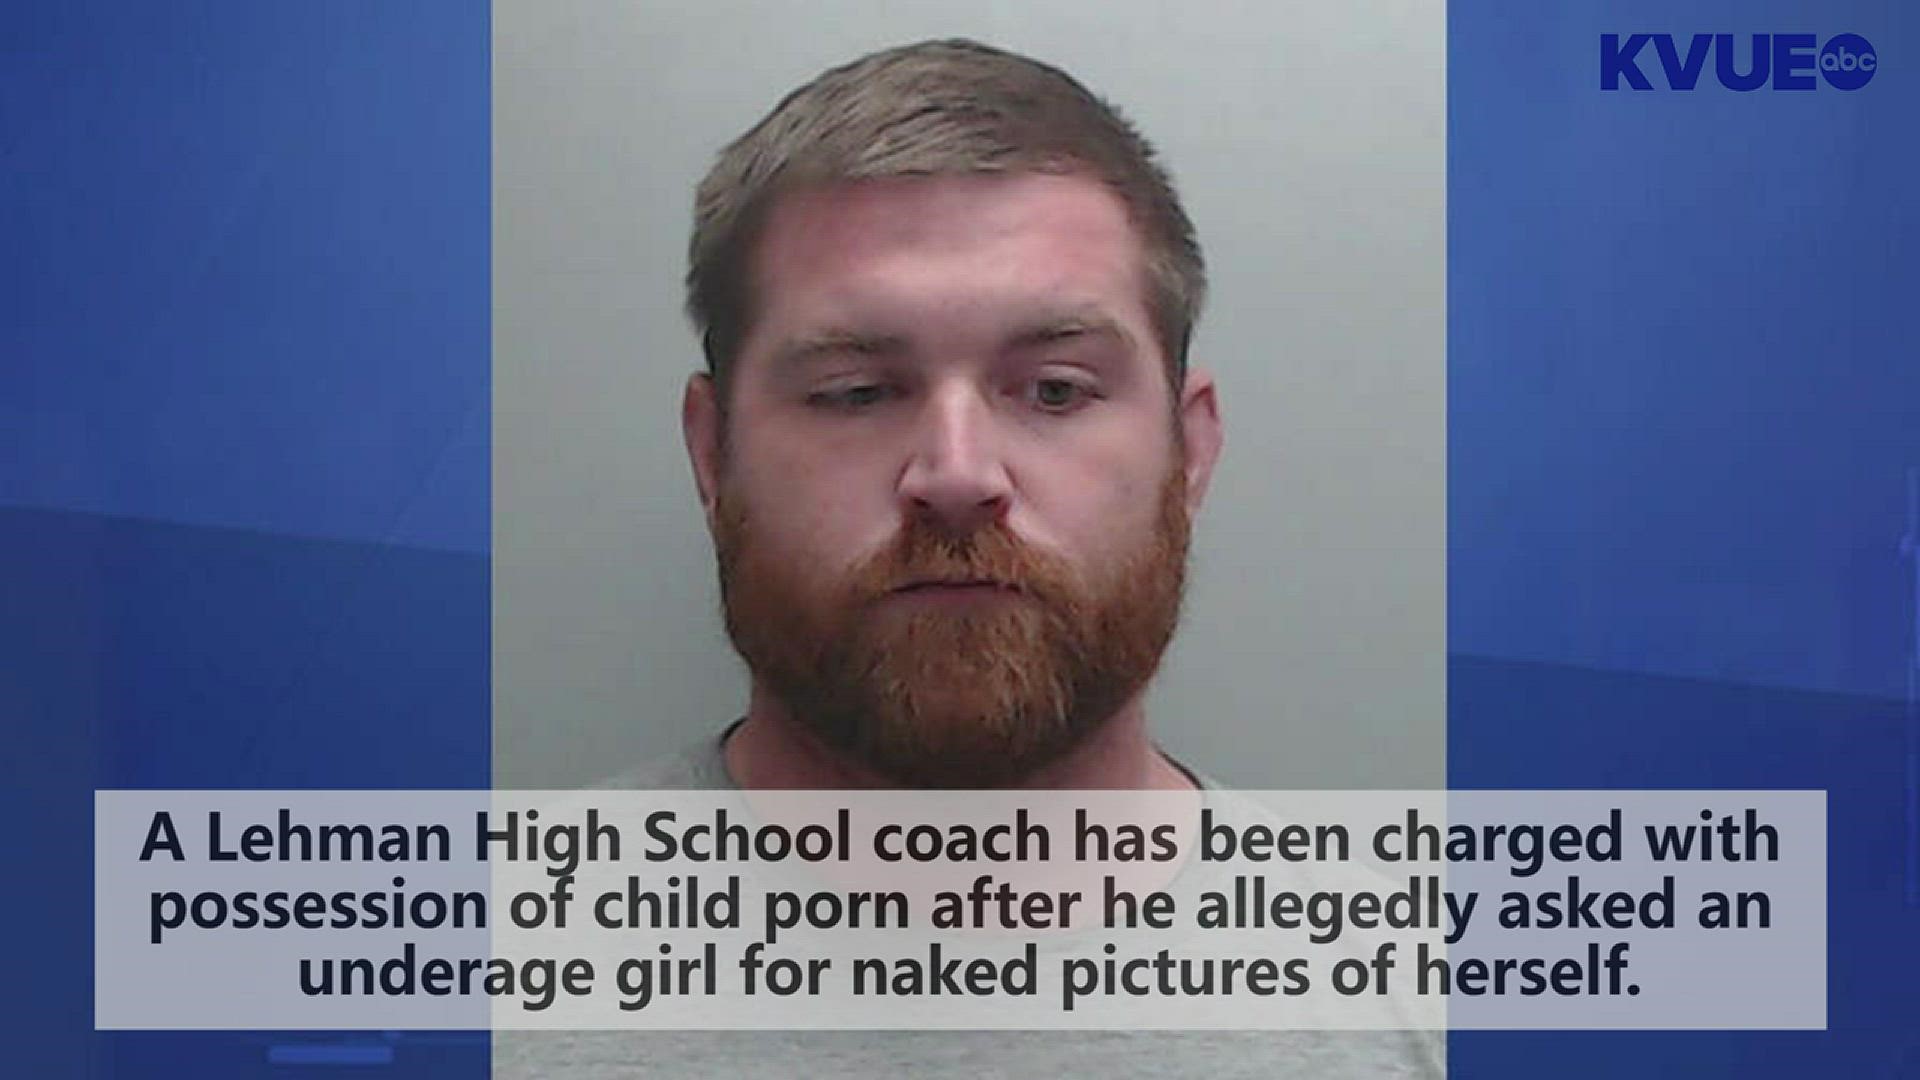 A coach at Lehman High School in Hays County has been charged with possession of child porn after he allegedly asked a former student at a different high school for naked pictures of herself, according to an affidavit.